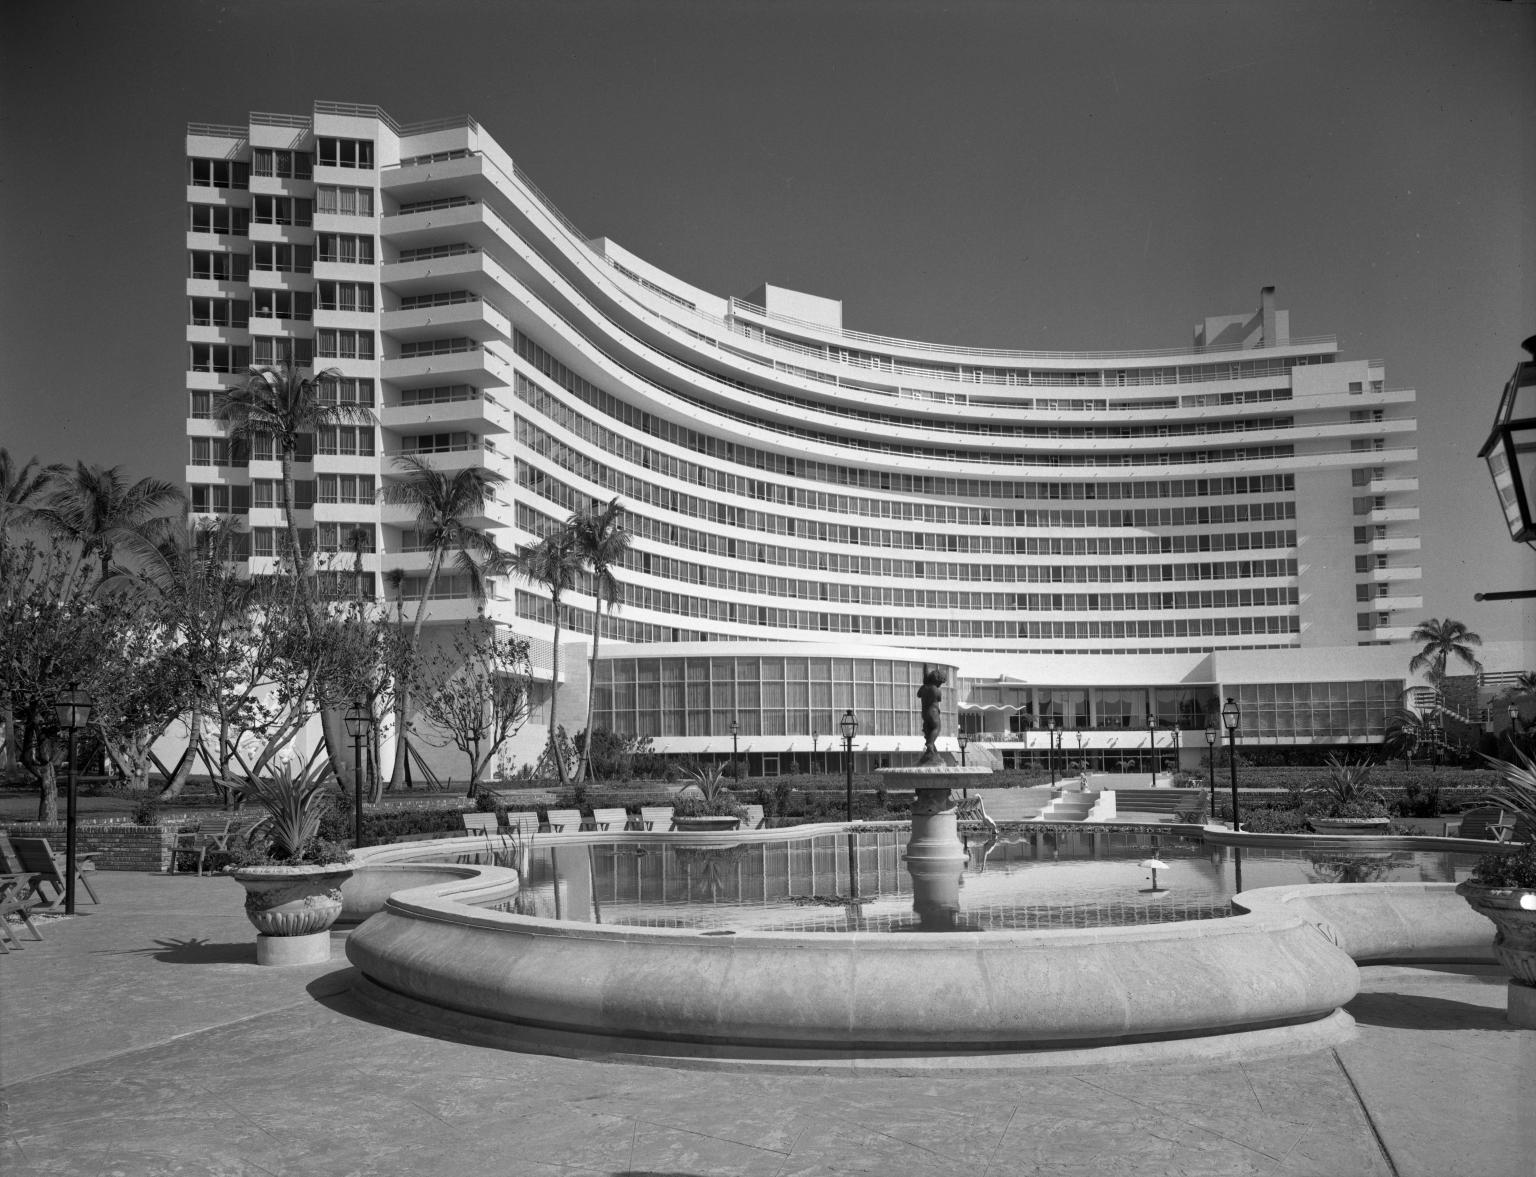 Photograph of curved exterior of a hotel with pool and fountain in the middle.